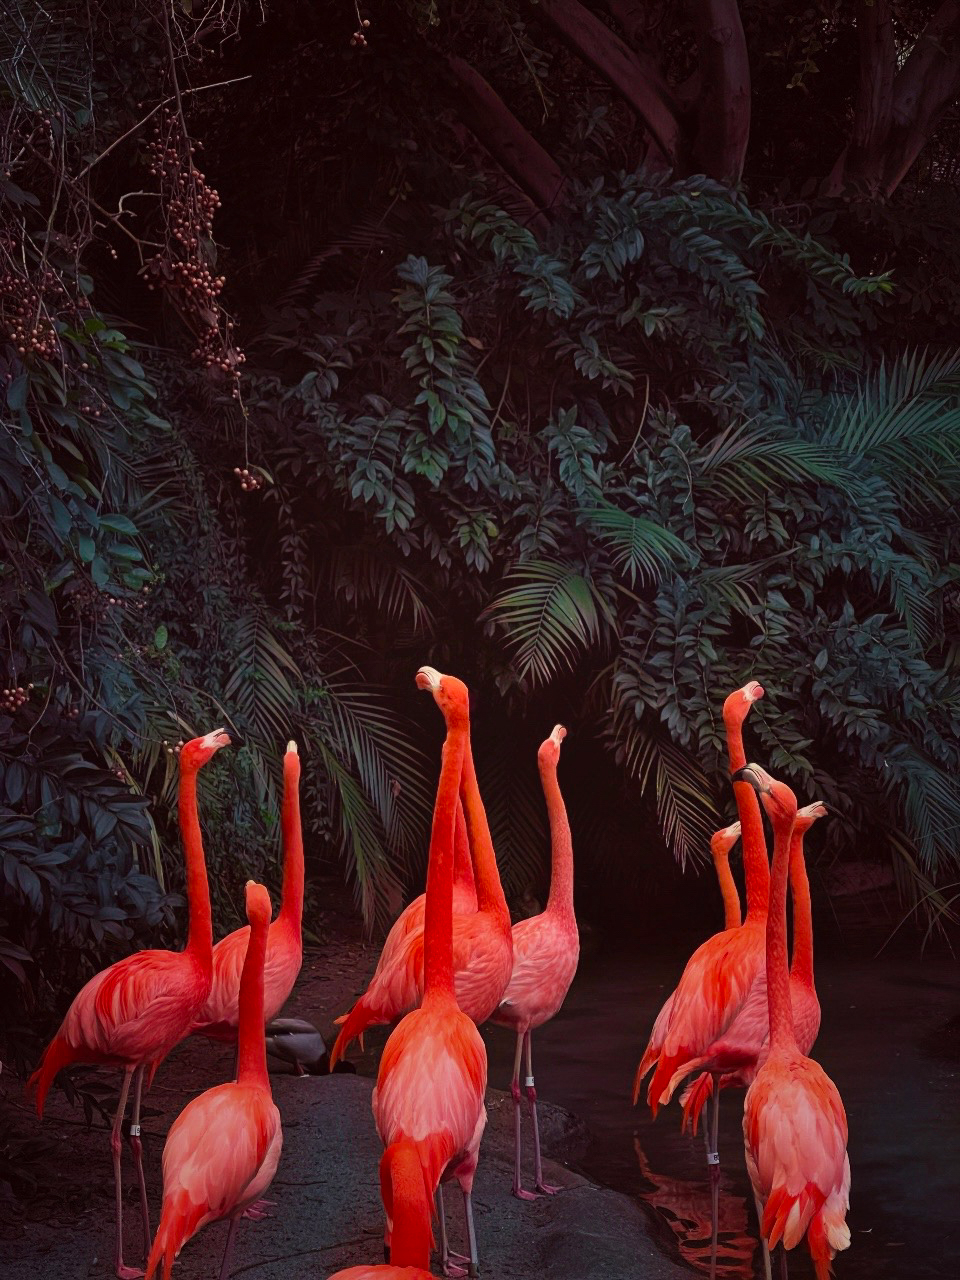 This stunning shot of pink flamingos in San Diego came in first place for the animals category. "Once en Rosa" by Skye Snyder on an iPhone 12 Pro Max.